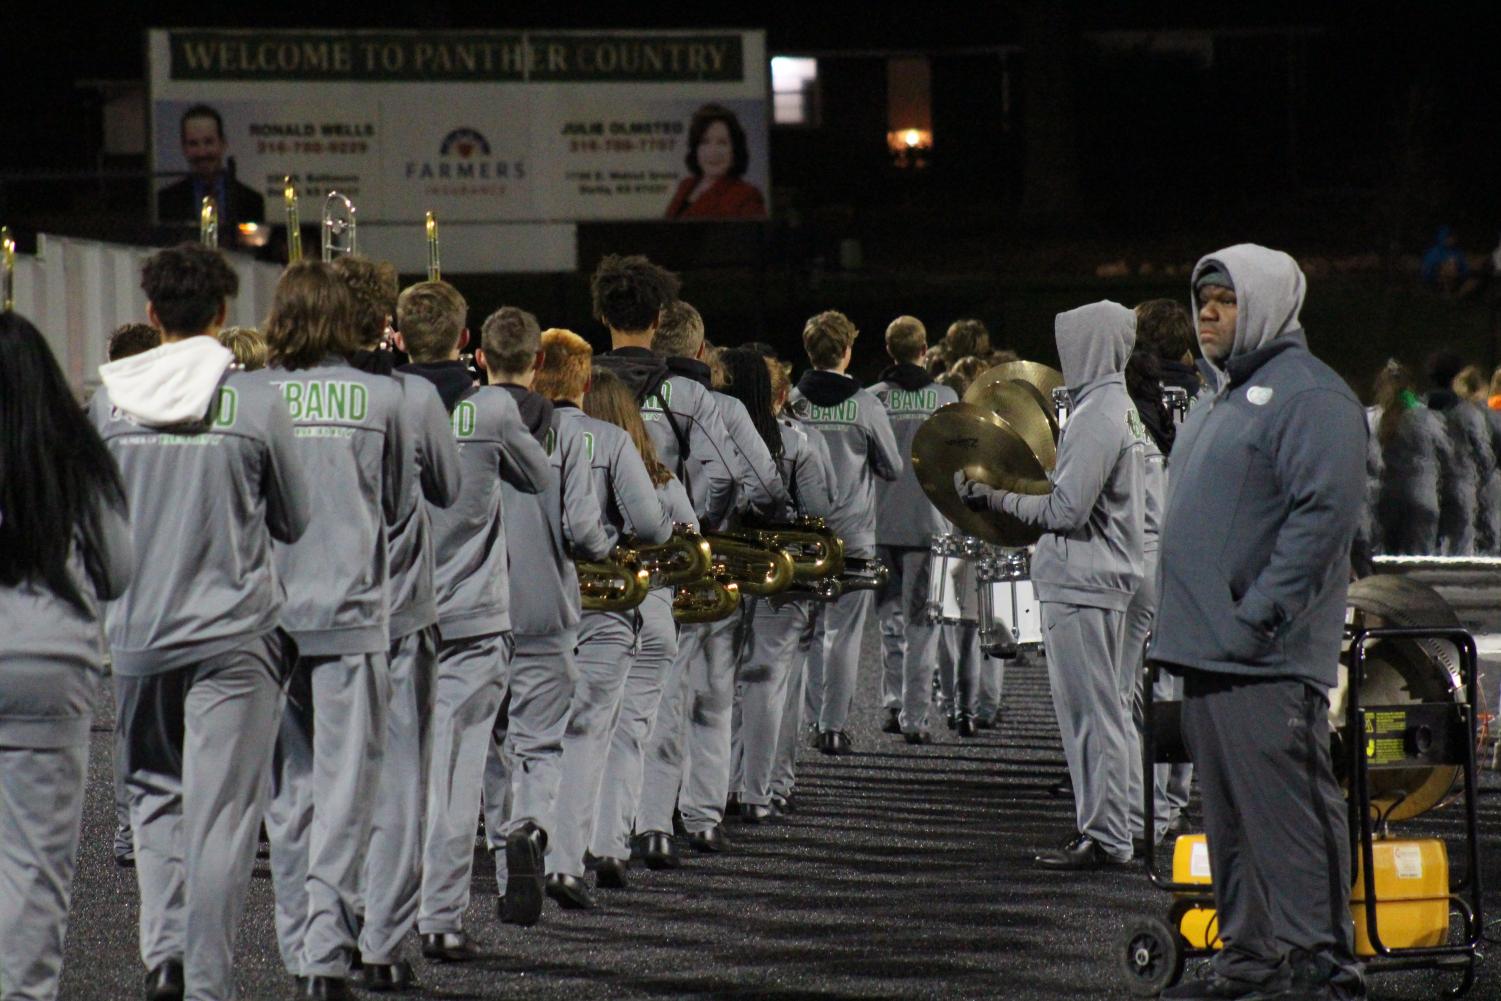 Football+Sectional+Championship+vs.+Lawrence+Free+State+11%2F12+%28Photos+by+Natalie+Wilson%29